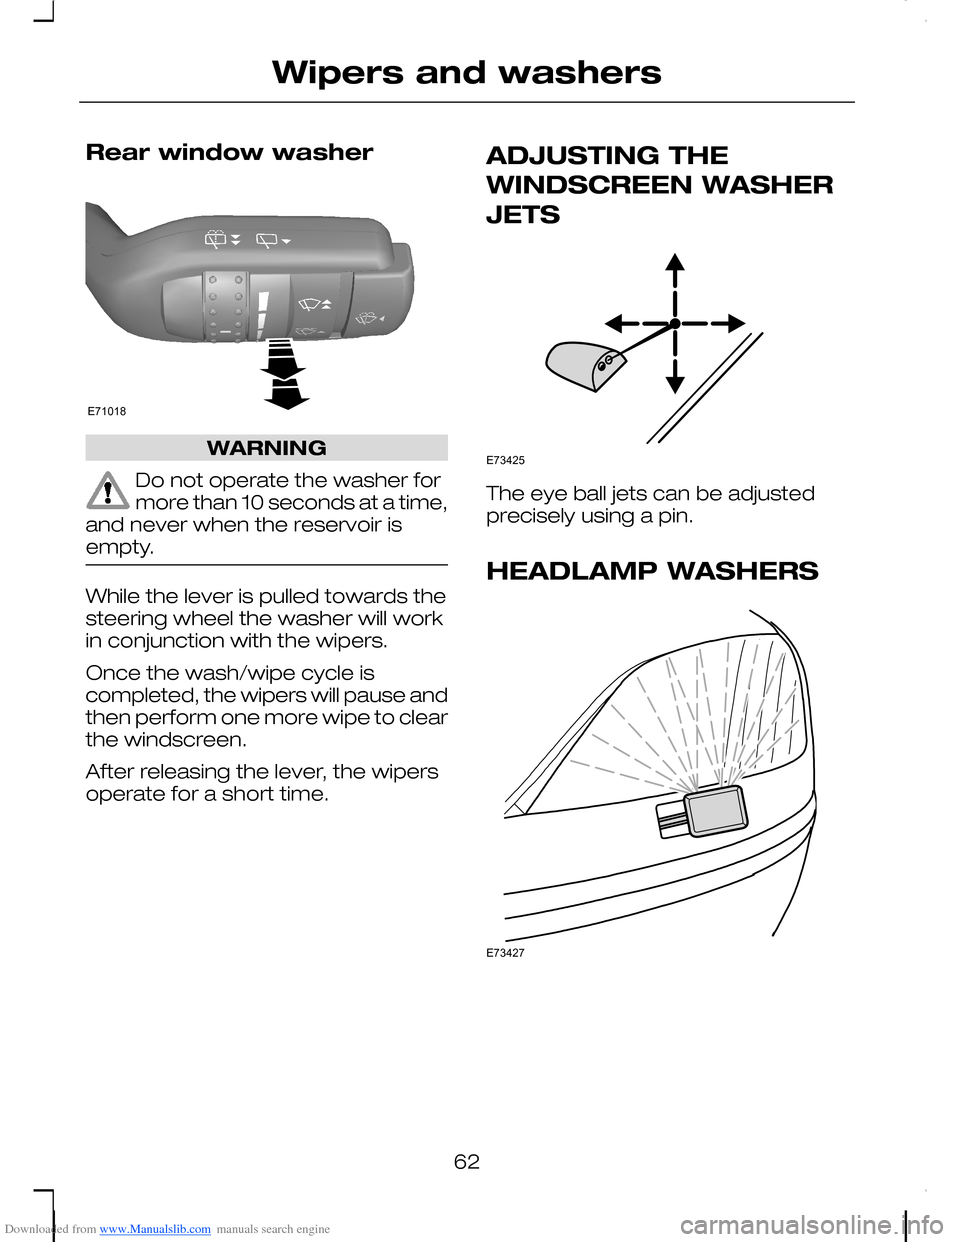 FORD C MAX 2008 1.G Owners Manual Downloaded from www.Manualslib.com manuals search engine Rear window washer
WARNING
Do not operate the washer formore than 10 seconds at a time,and never when the reservoir isempty.
While the lever is